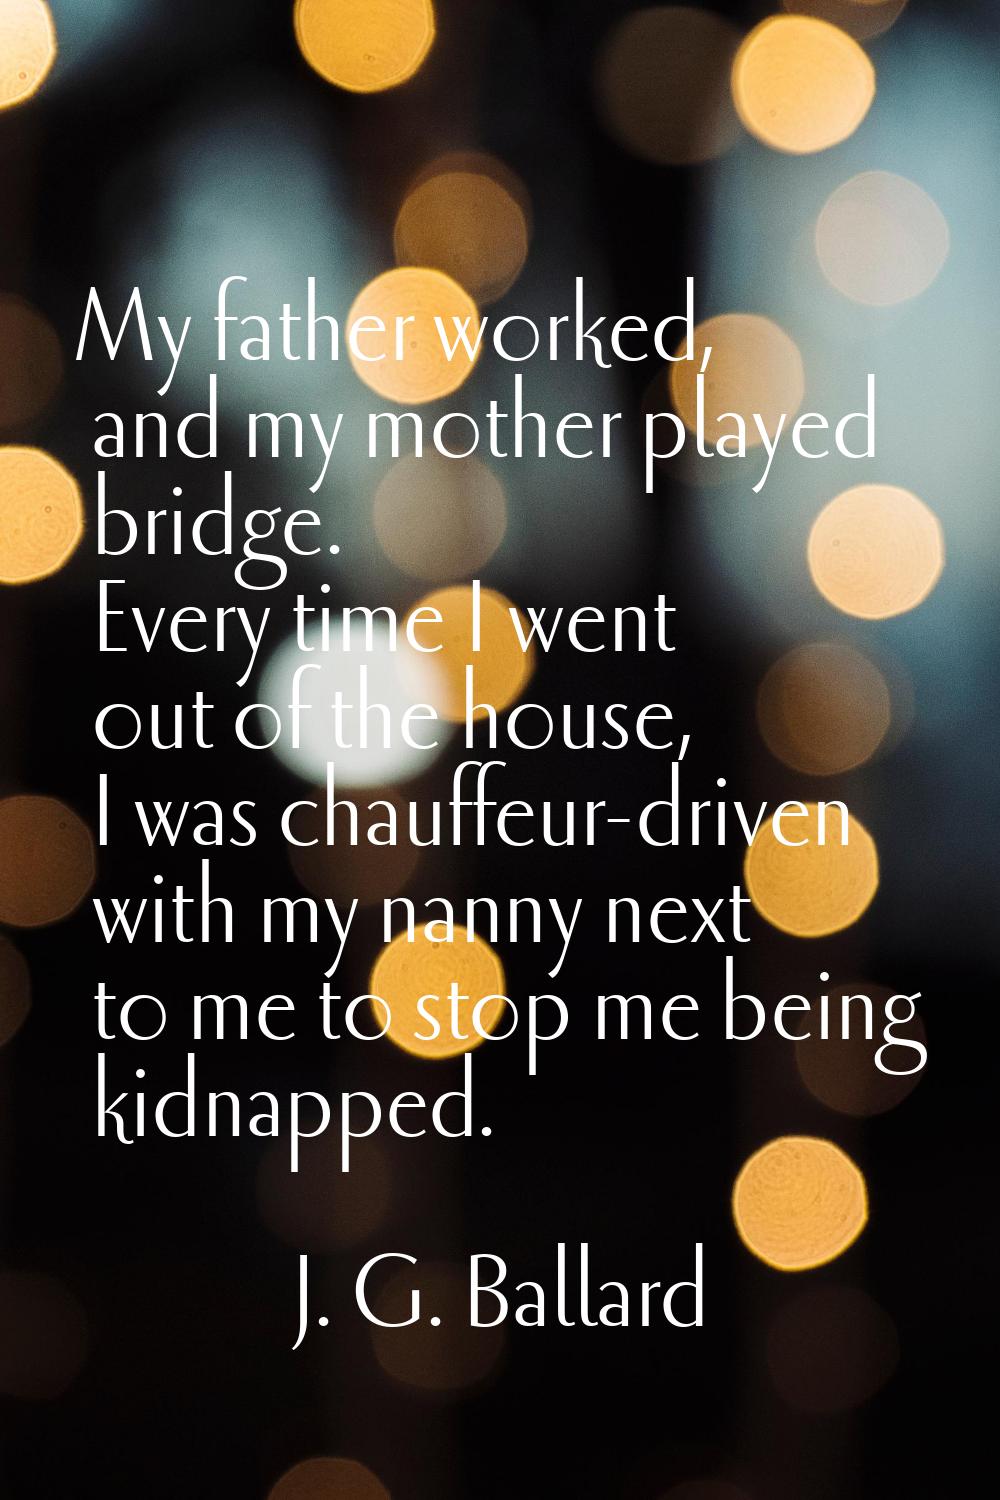 My father worked, and my mother played bridge. Every time I went out of the house, I was chauffeur-